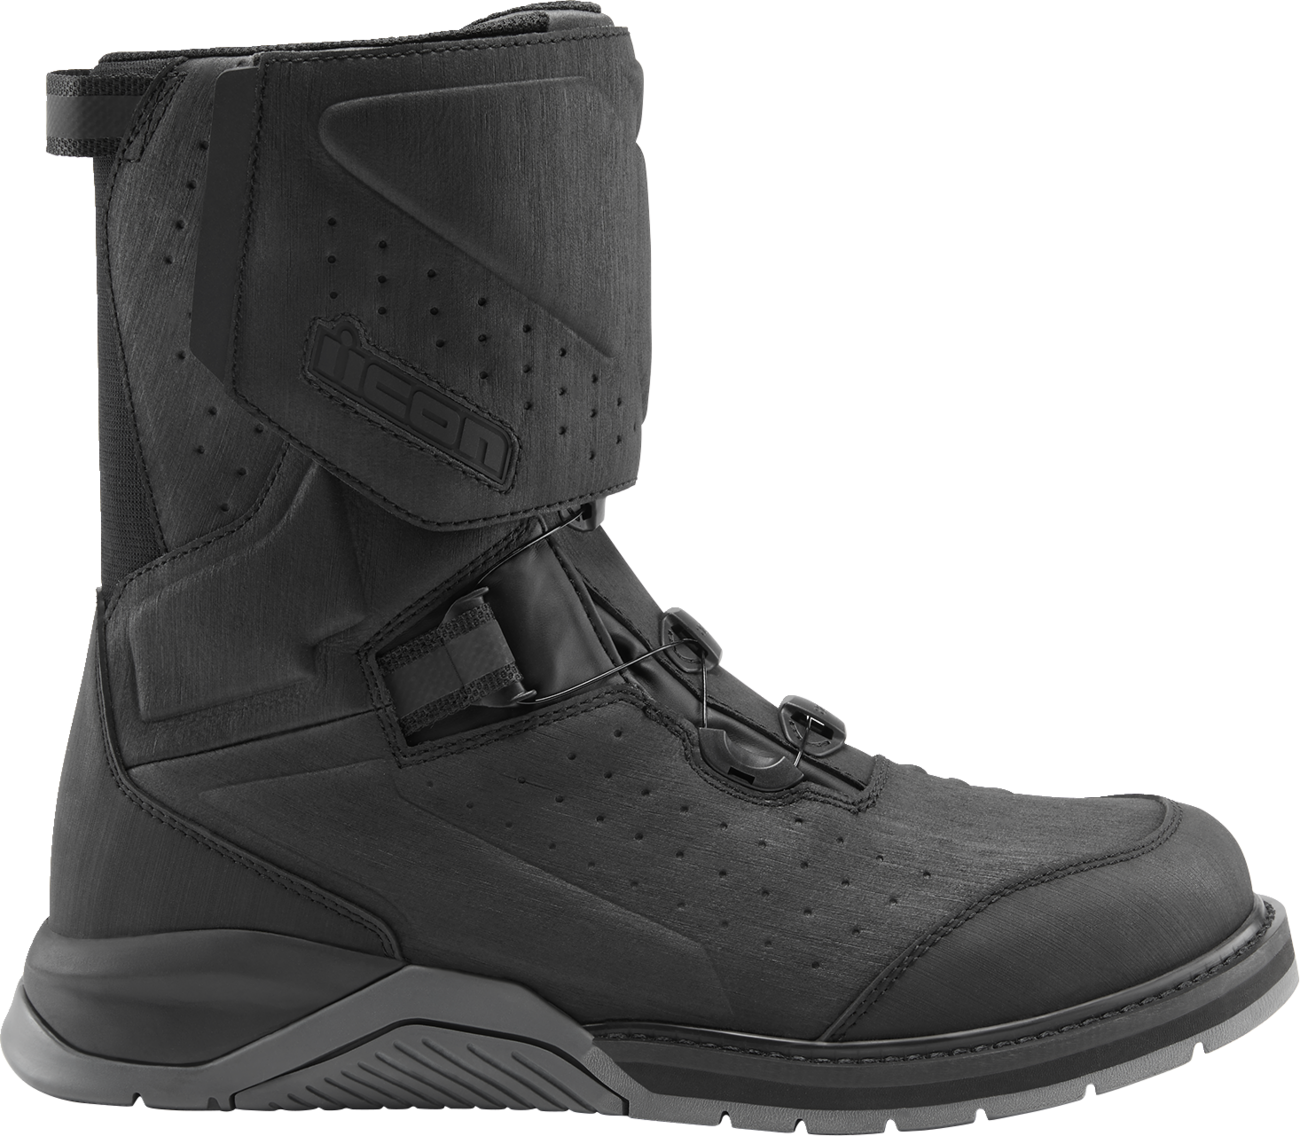 ICON Alcan Waterproof Boots - Black - Size 12 3403-1241